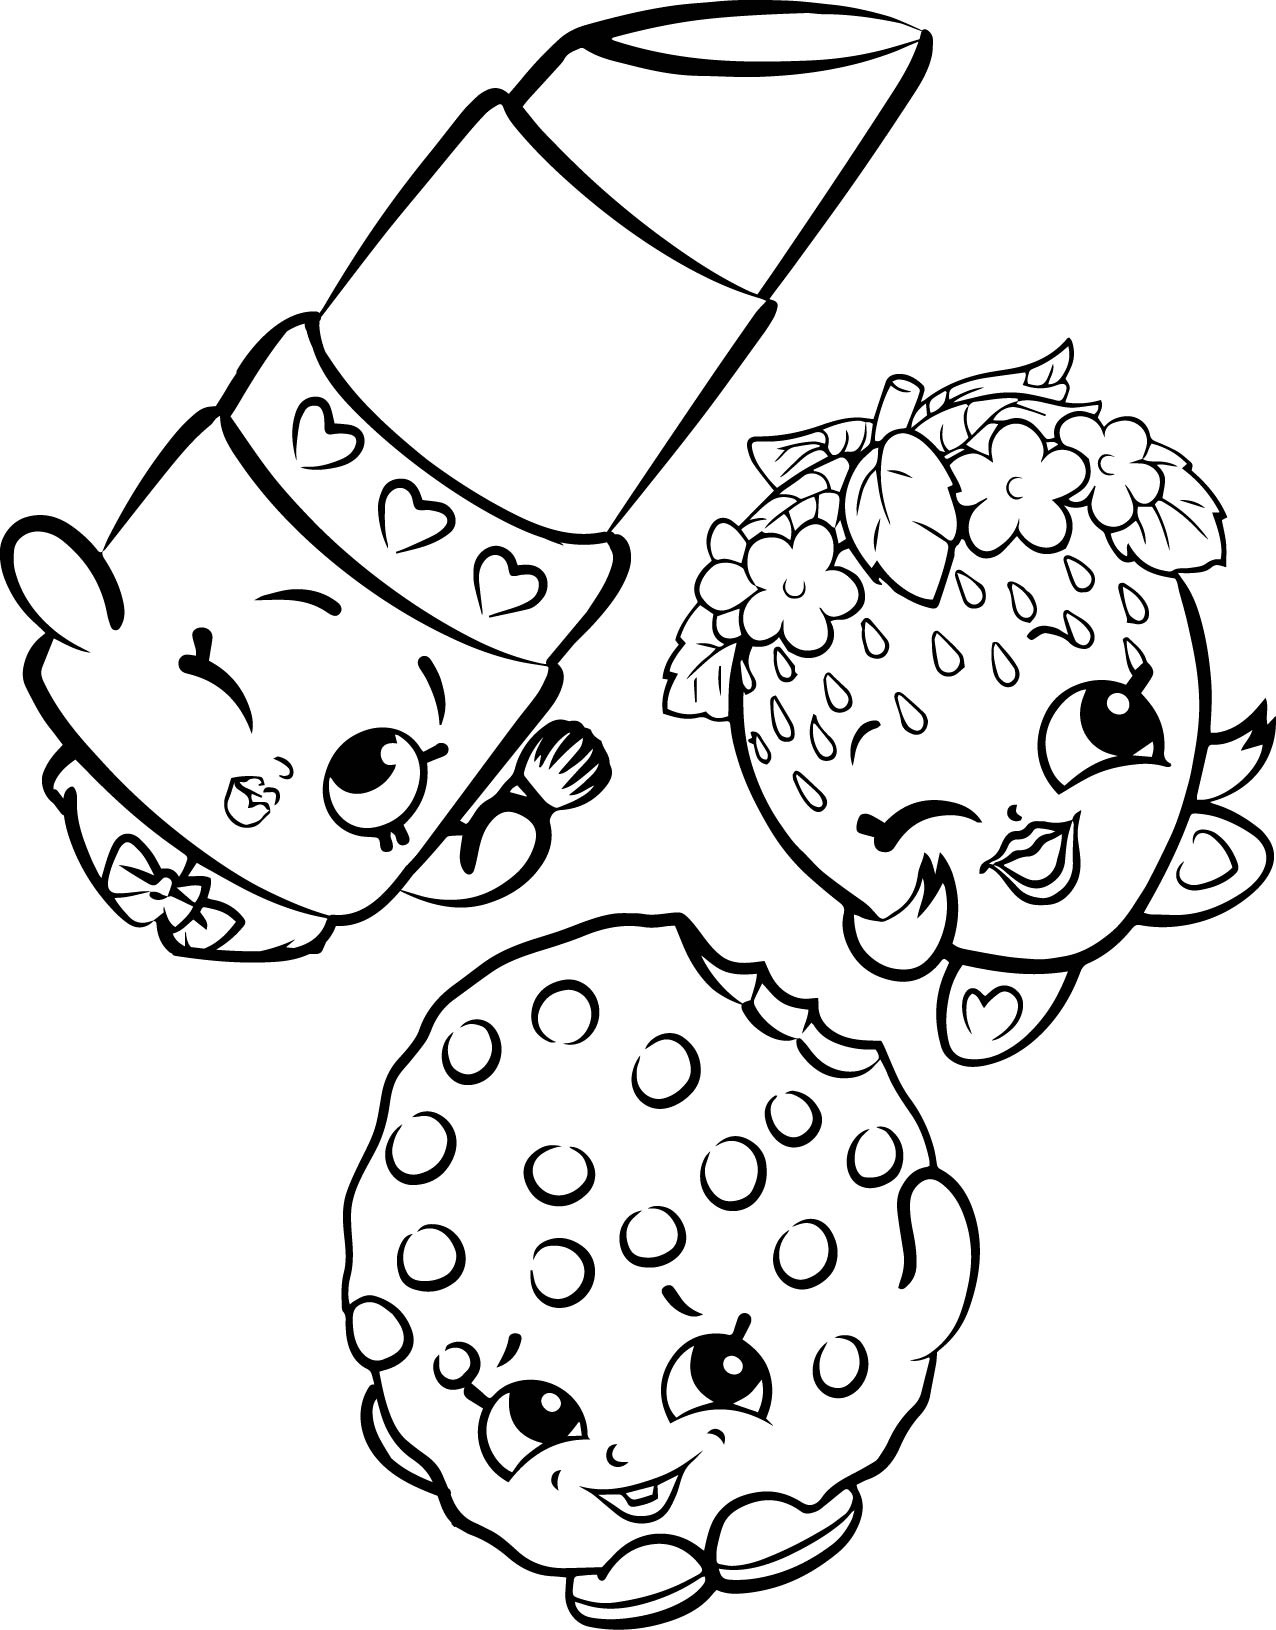 Shopkins Coloring Pages - Best Coloring Pages For Kids - Shopkins Coloring Pages Free Printable